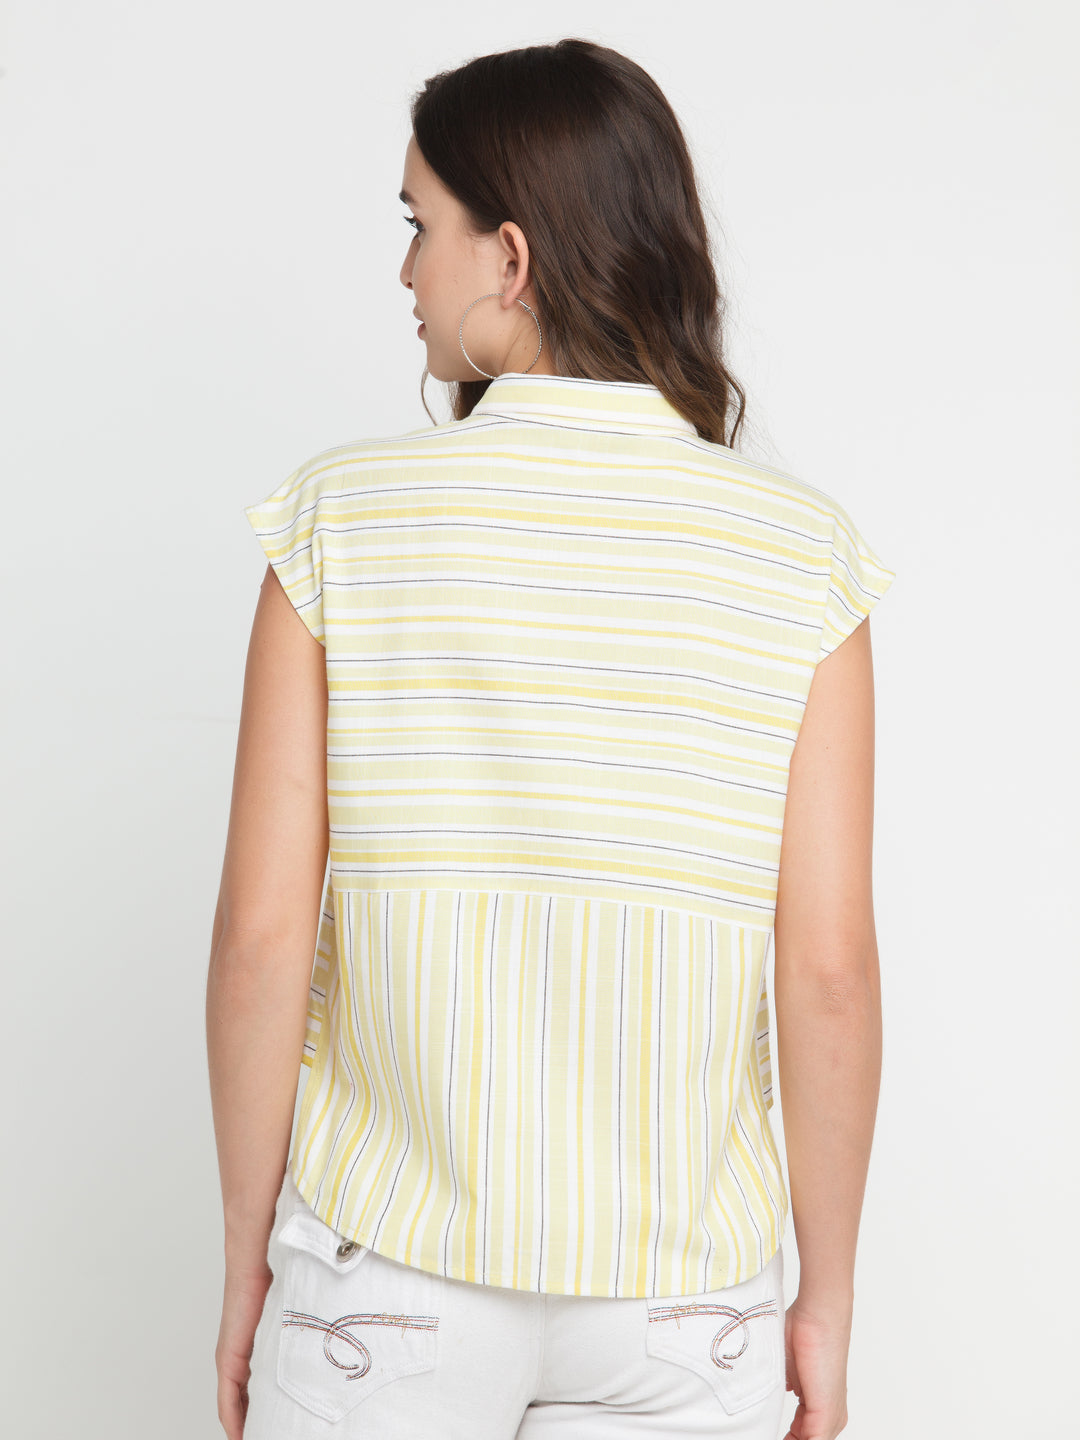 Off White Striped Shirt For Women